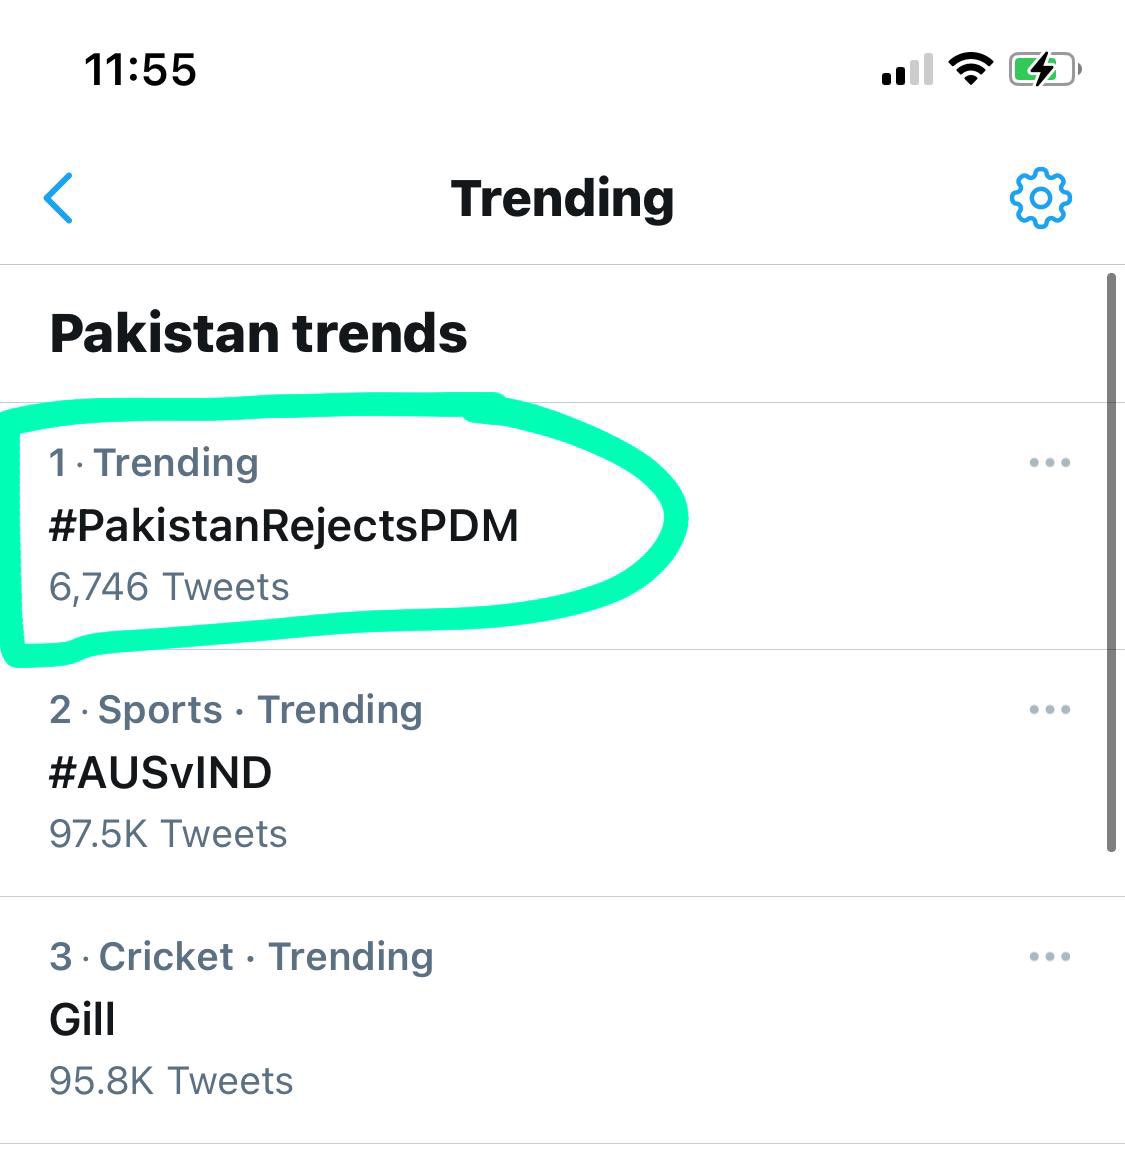 To conclude, I would say that the unnatural alliance, no public interest cause, Maryam’s selfishness & arrogance, pro PDM journalists credibility dent, PTI Social Media, PM IK’s patience, & “Basha’oor” people of Pakistan contributed to PDM’s failure.  #PakistanRejectsPDM